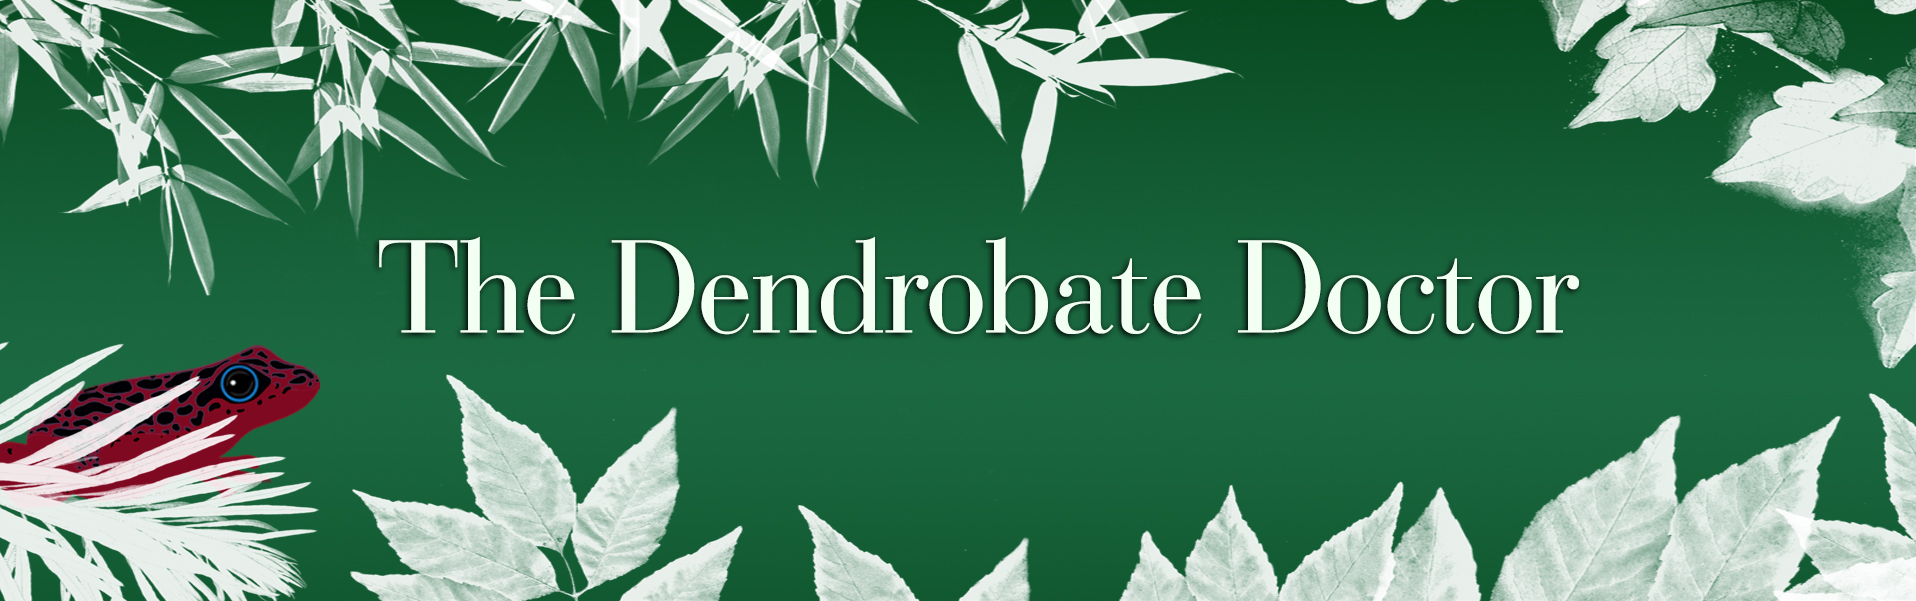 The Dendrobate Doctor